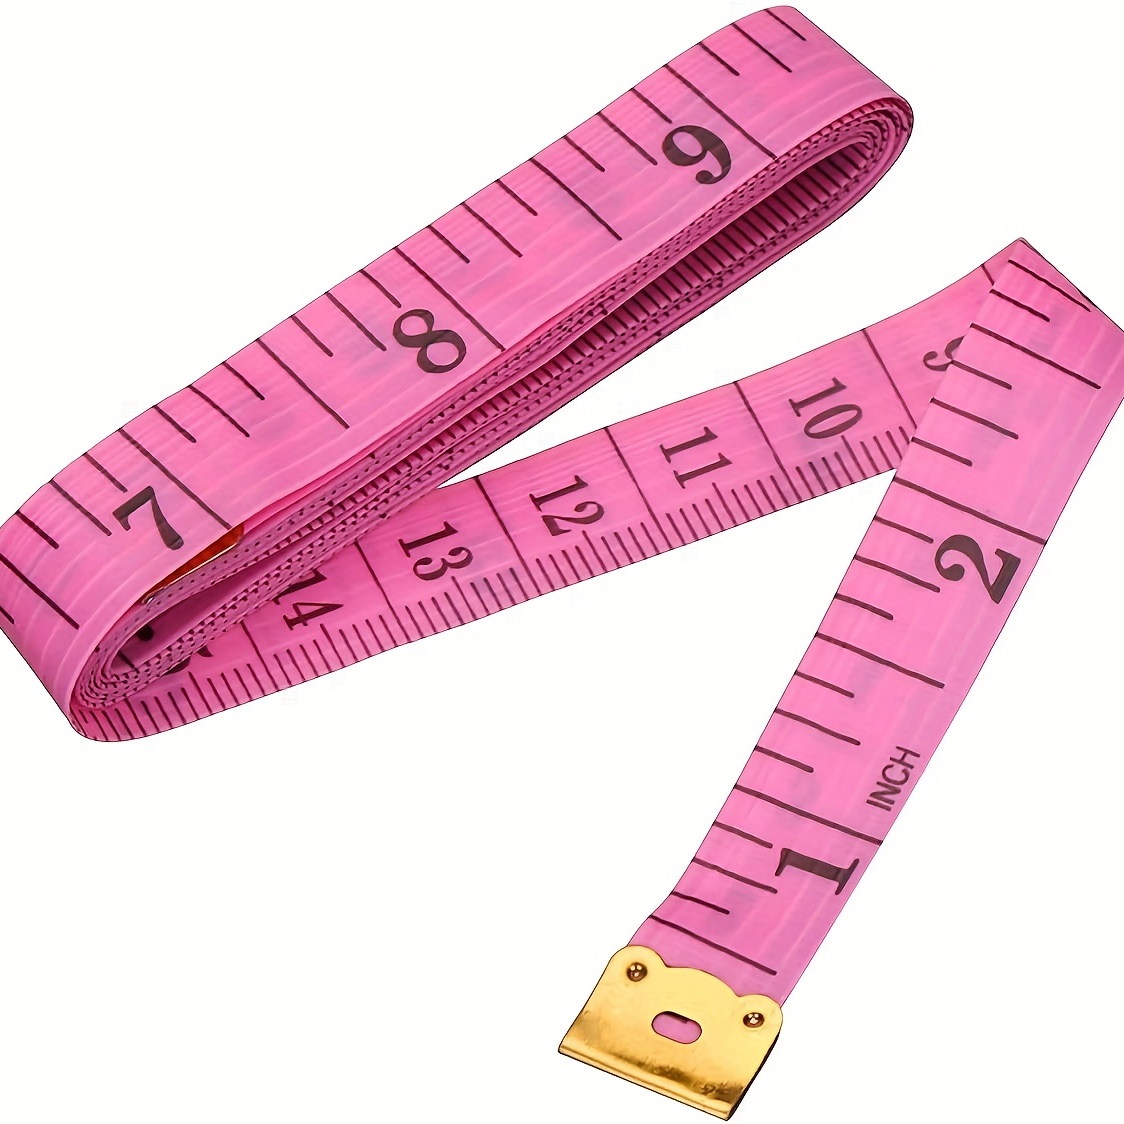  Tape Measure Measuring Tape for Body Sewing Tailor Fabric Cloth  Weight Loss Craft Supplies Soft Flexible Fiberglass Ruler Dual Scale  Measurement Tape (Pink, 60 INCH / 150 cm) : Arts, Crafts & Sewing